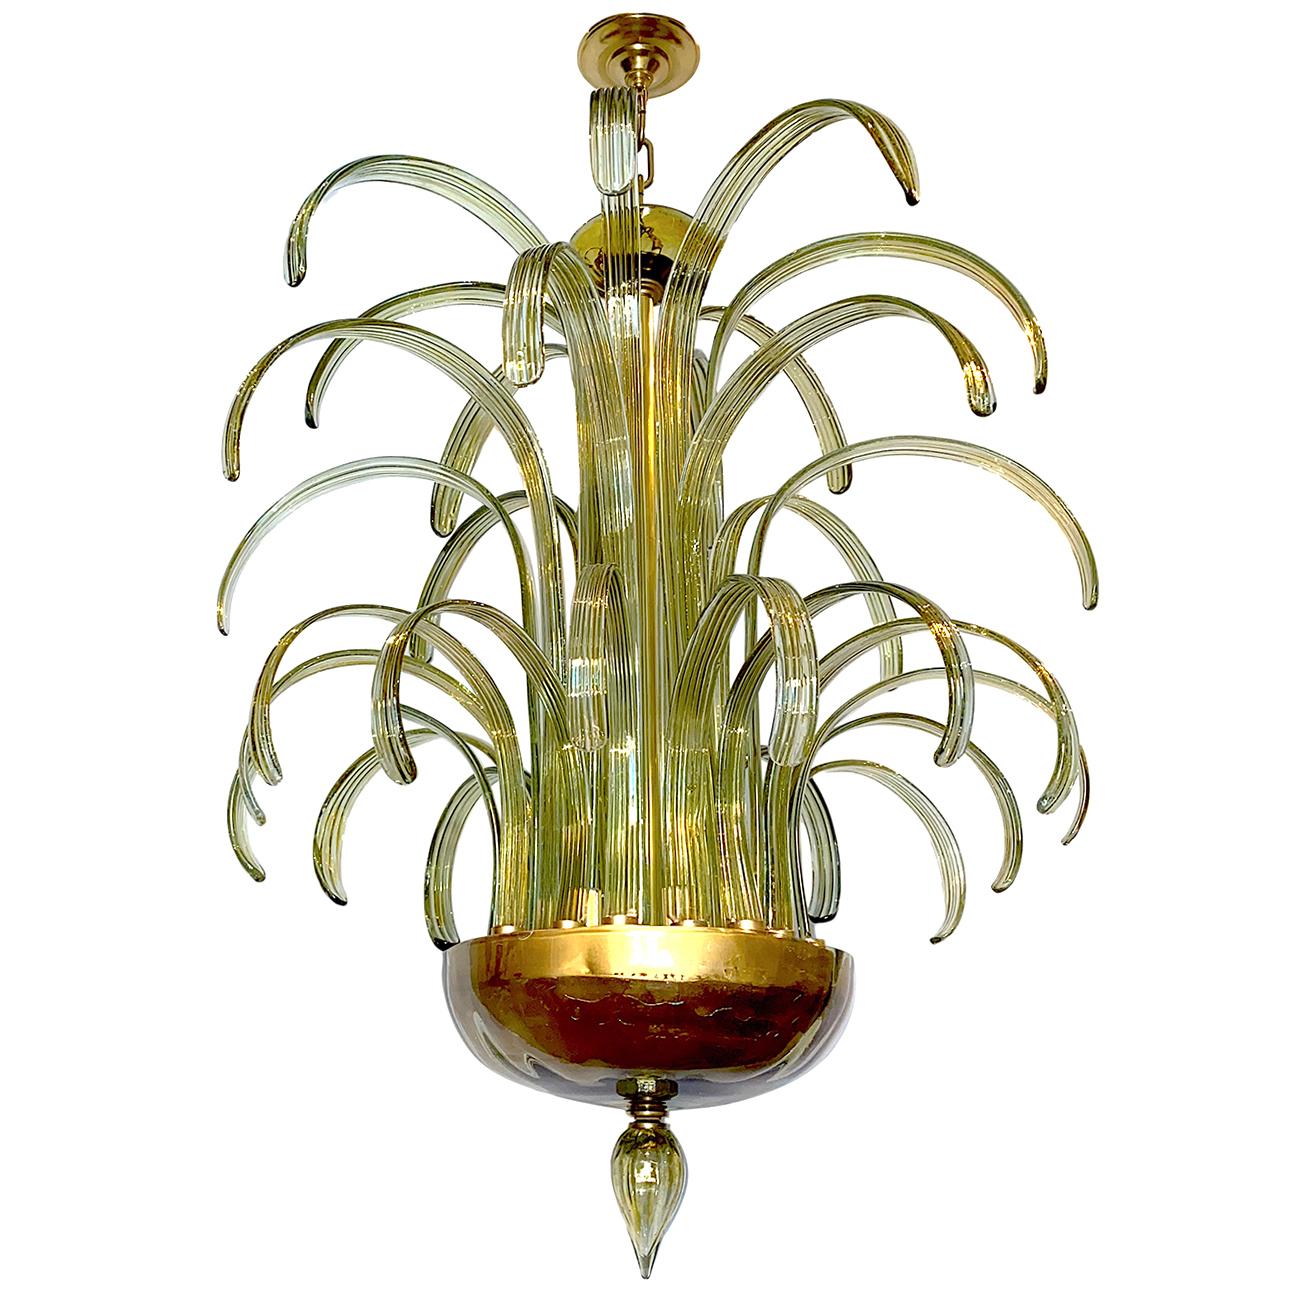 A large Italian blown glass eight-light chandelier with long pale green blown glass fronds, bowl and finial.

Measurements:
Drop (adjustable): 50